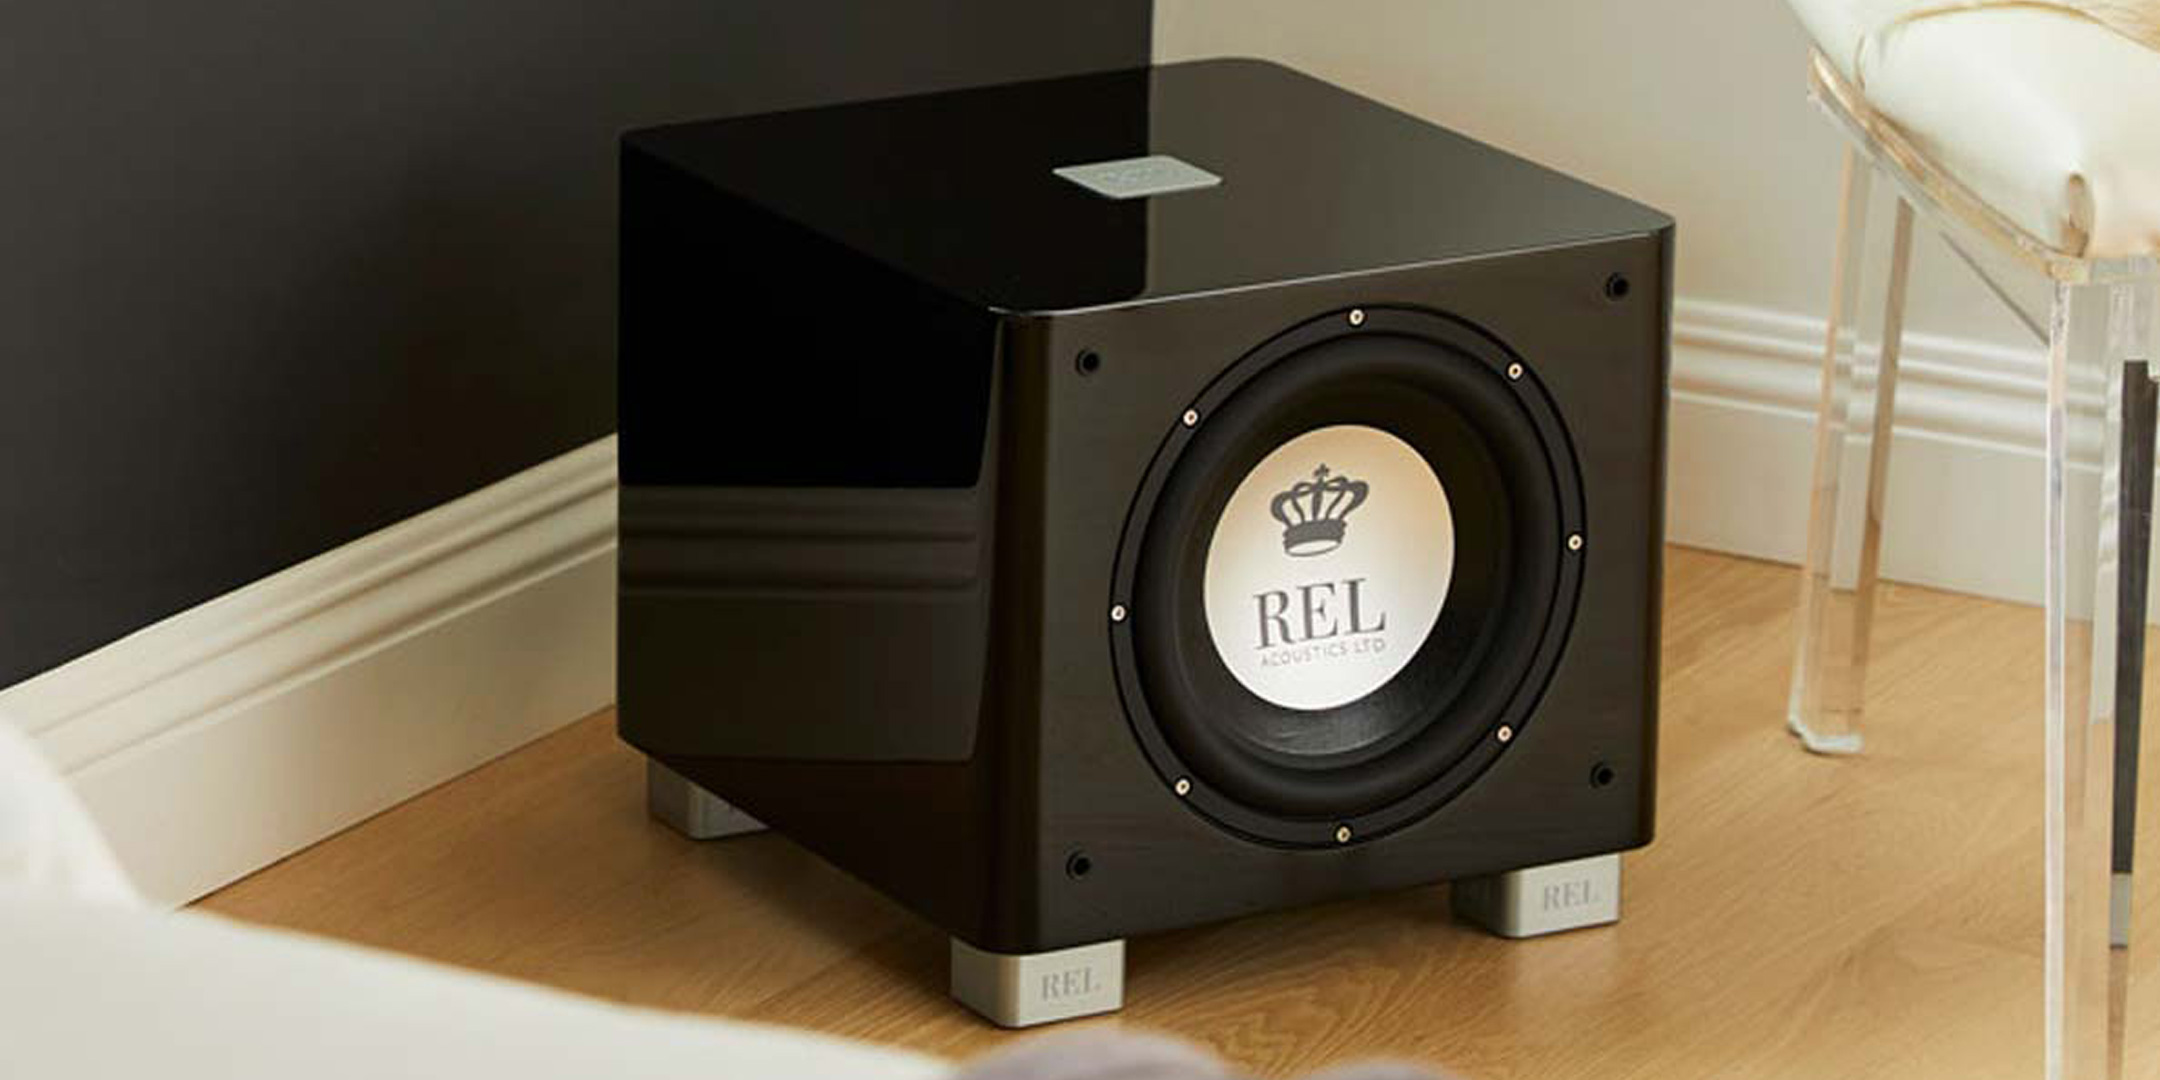 Pic showing the REL T/9x Subwoofer on the floor of a sitting room